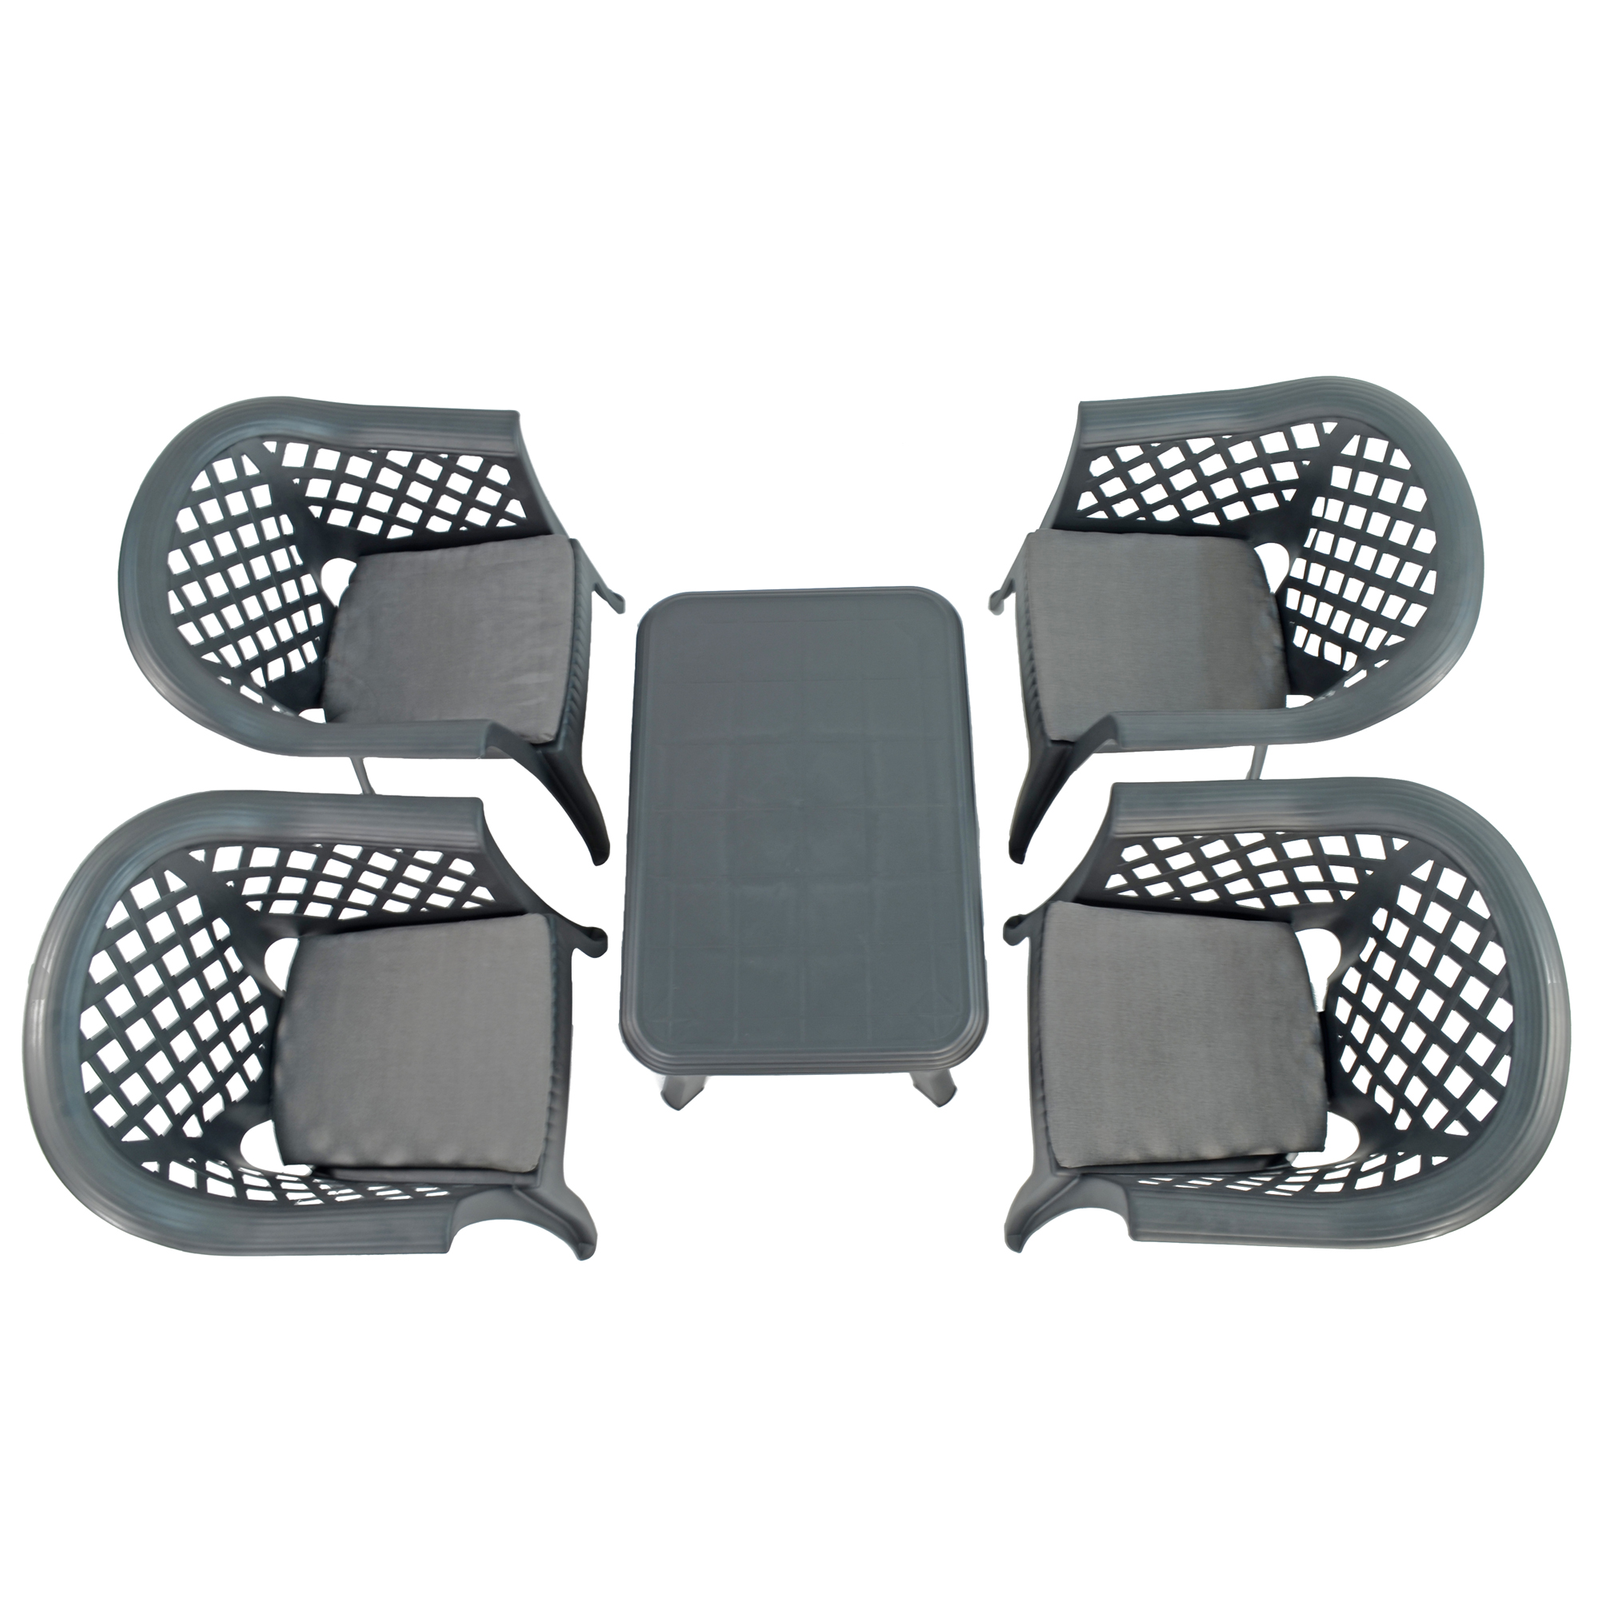 Trabella Savona Coffee Table With 4 Savona Chairs Anthracite Dining Sets Trabella   